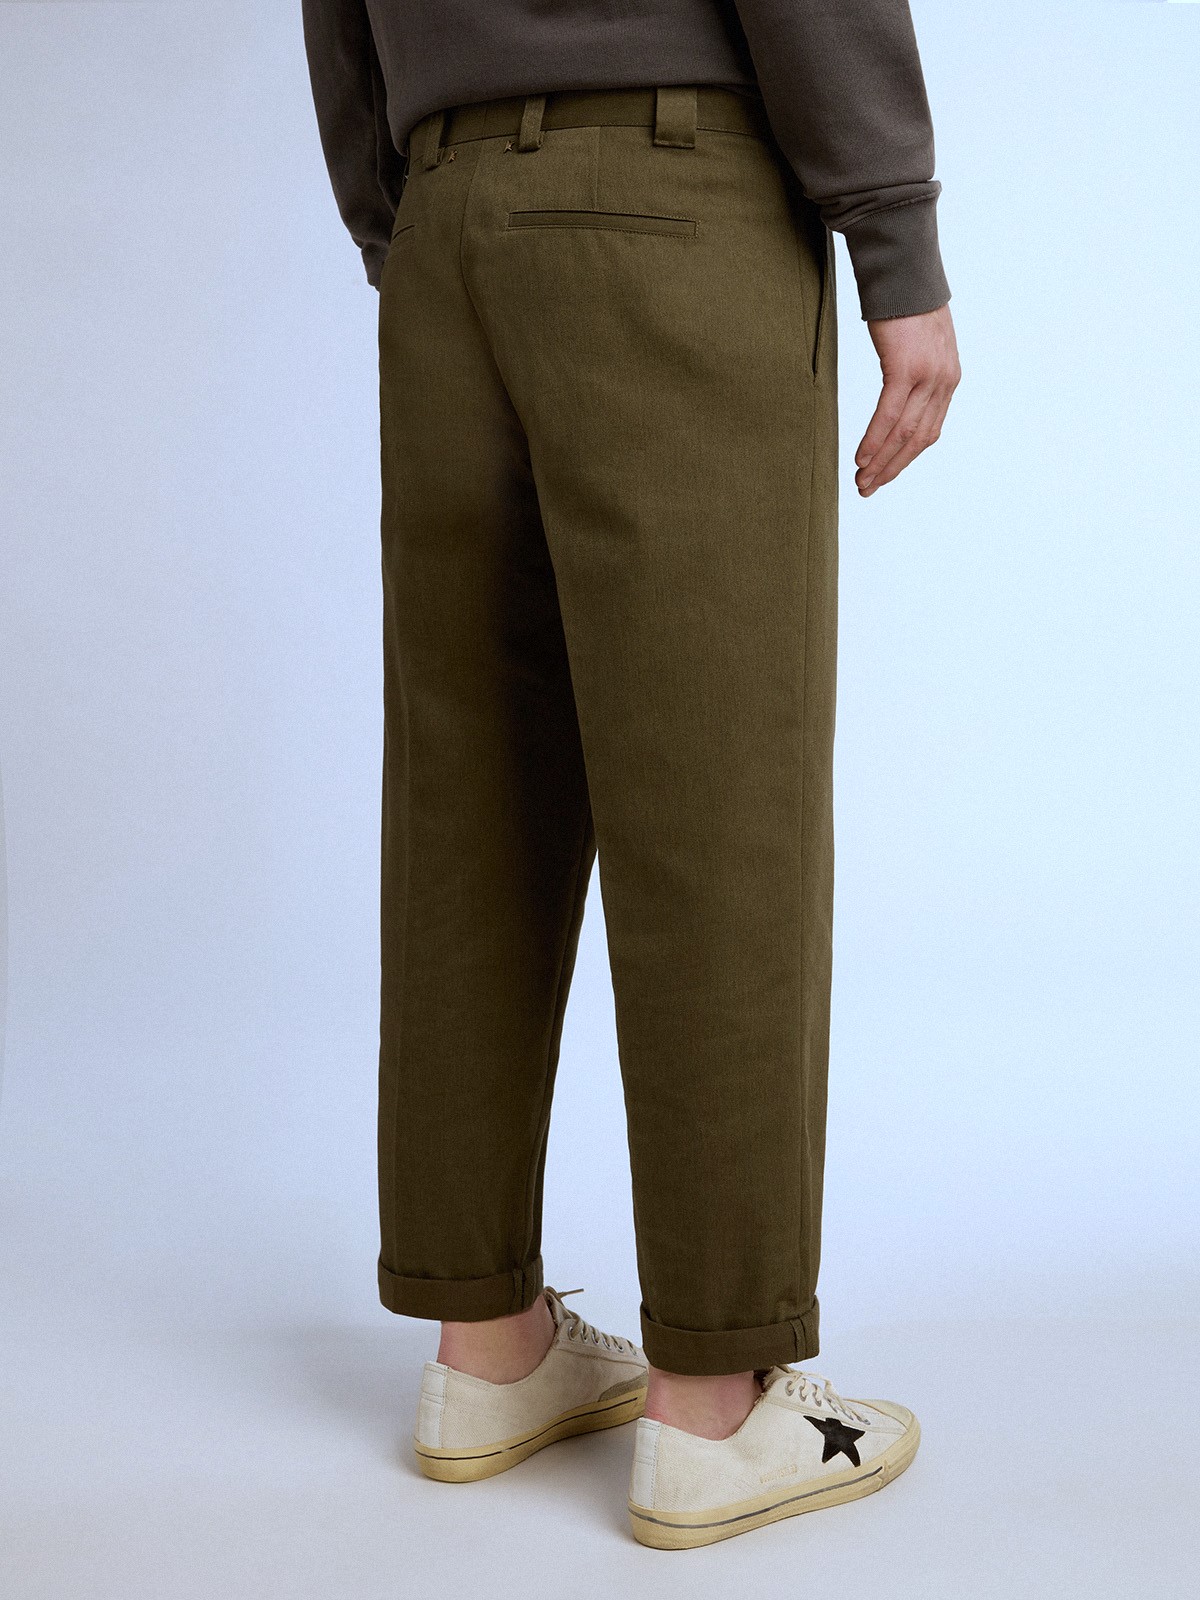 GOLDEN GOOSE Chino Skate Pants in Olive 46